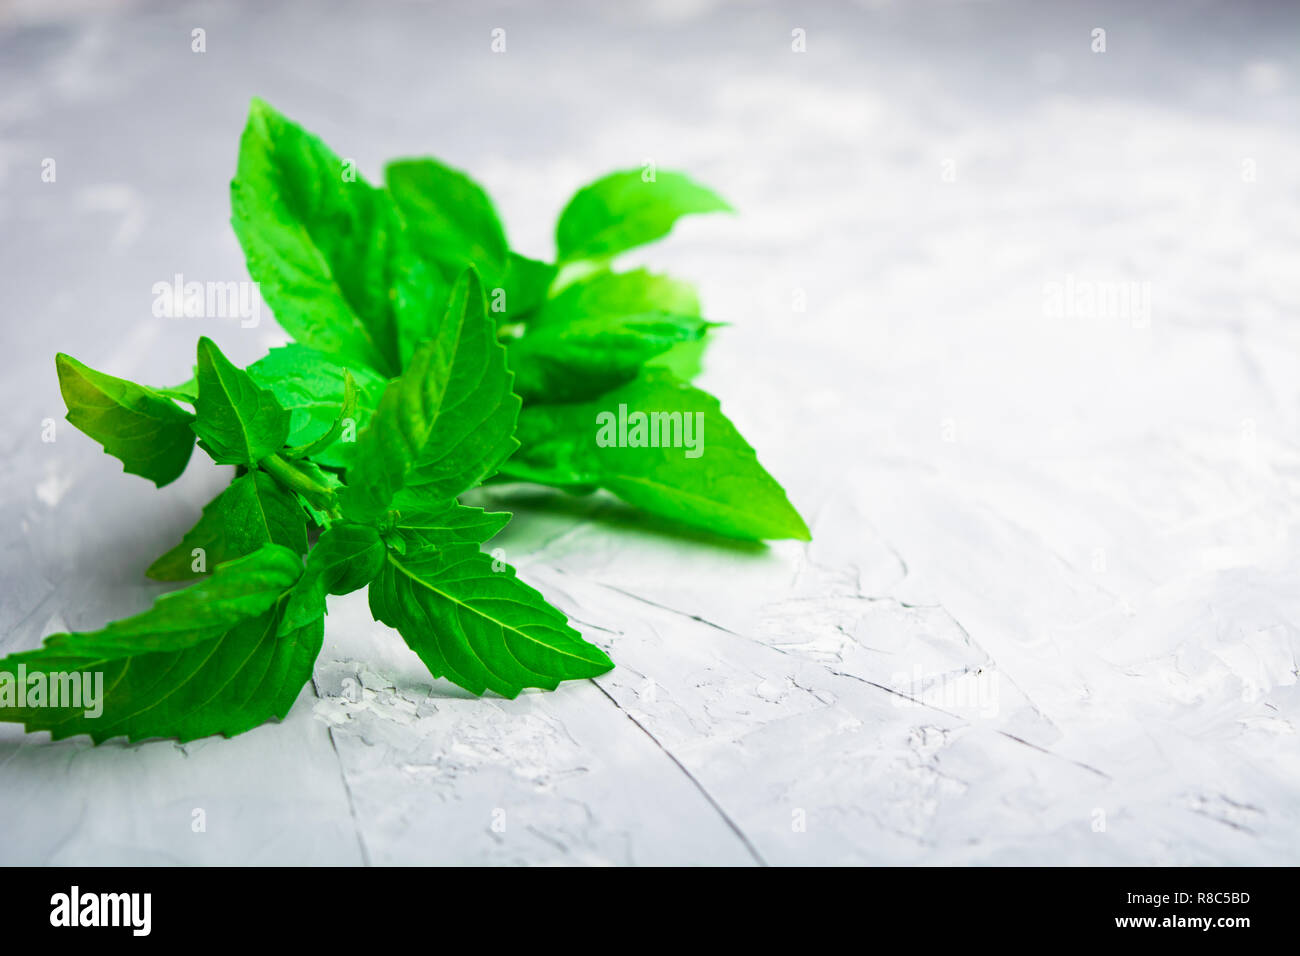 Closeup view of green italian basil over rude background Stock Photo